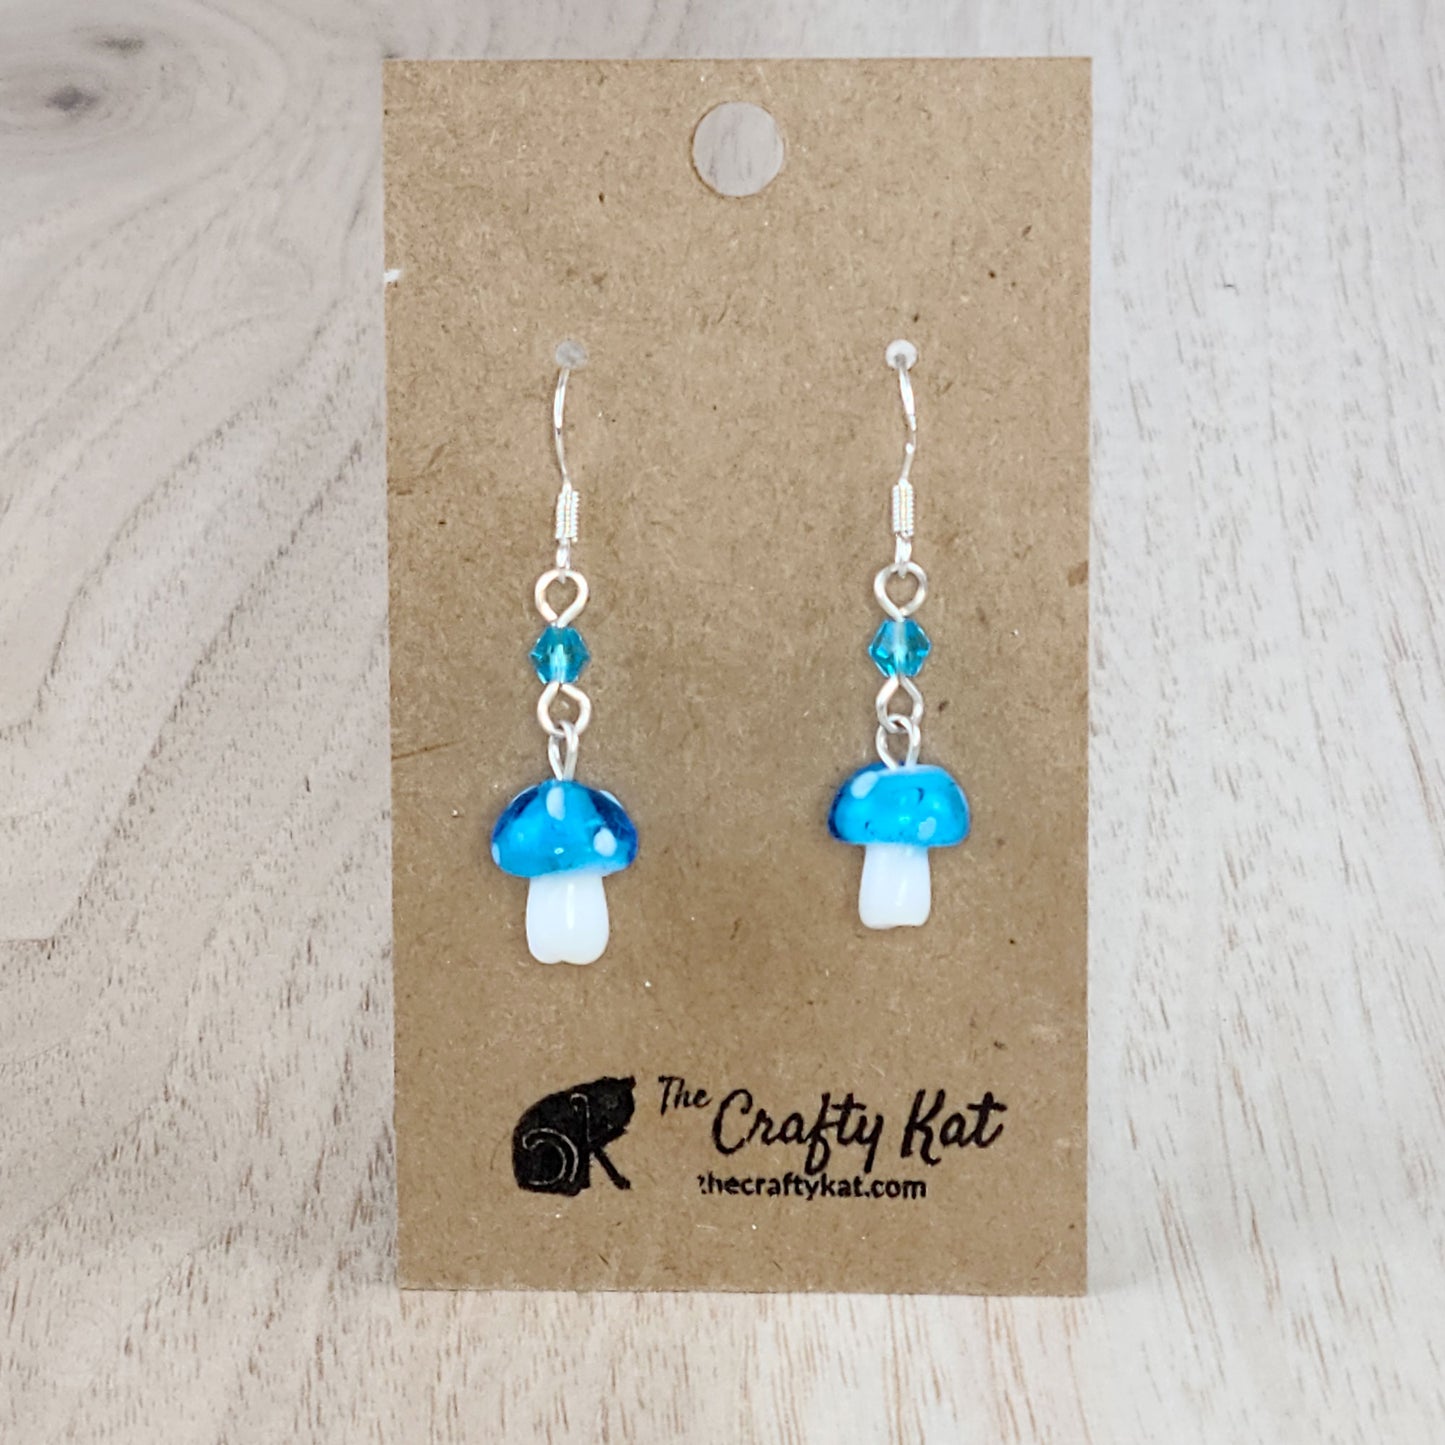 Mushroom-shaped tiered earrings made of lampwork and pressed glass beads with silver-plated base metal fittings. These mushrooms are aqua (sky blue) with white spots.